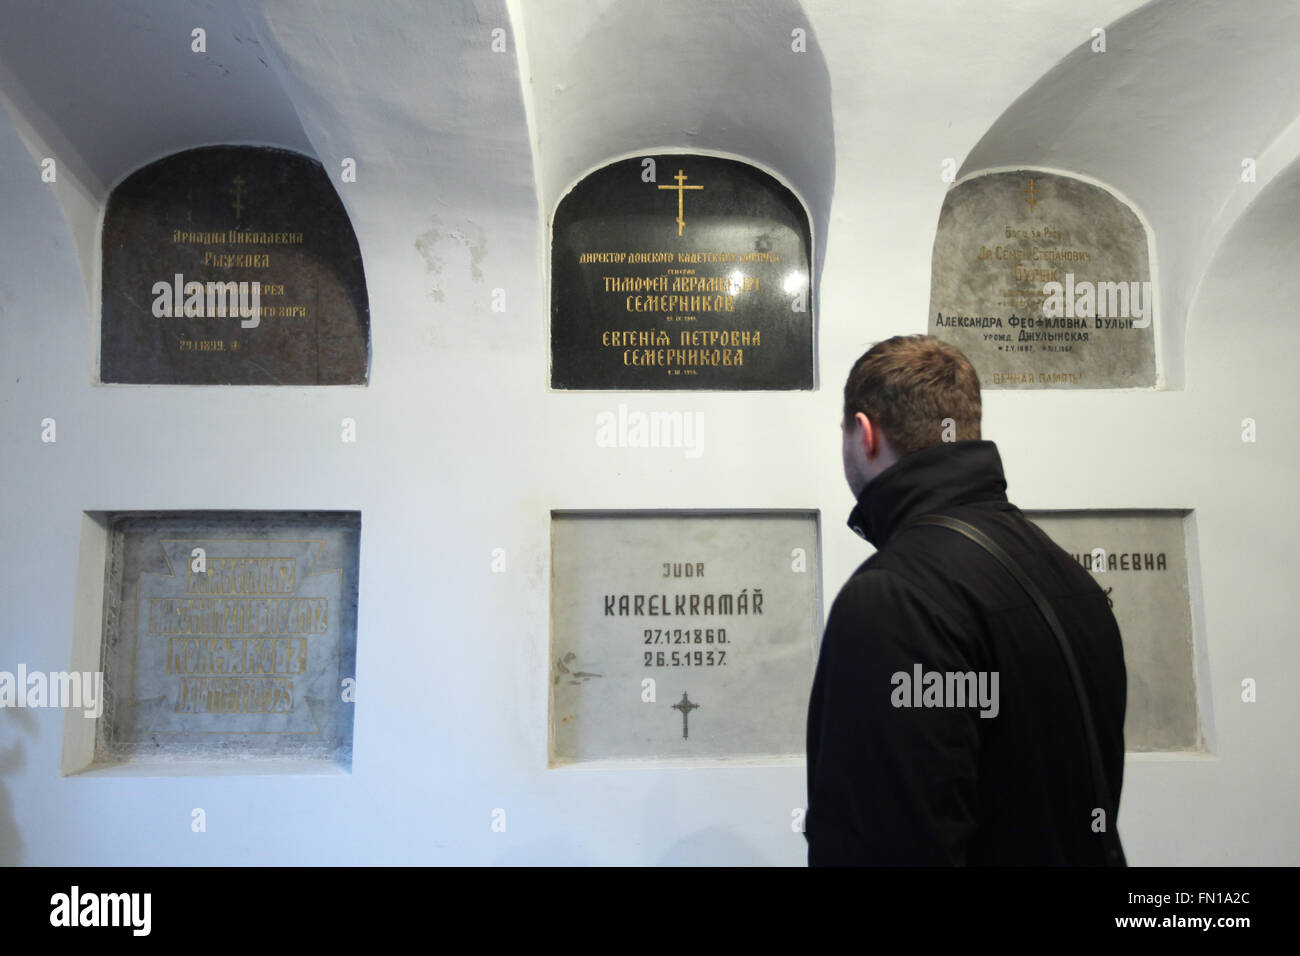 Russian historian Konstantin Gerbeev examines the burial place of Karel Kramar, the first Prime Minister of Czechoslovakia, in the underground crypt of the Dormition Church at the Olsany Cemetery in Prague, Czech Republic. Karel Kramar, born on December 17, 1860, was a Czech (Bohemian) politician and the first Prime Minister of Czechoslovakia from November 1918 to July 1919. He died at age 76 on May 26, 1937, and was buried next to his Russian wife Nadezhda Kramar, who died five months earlier at age 73. Grave of Russian art historian Nikodim Kondakov is seen at the left. Stock Photo